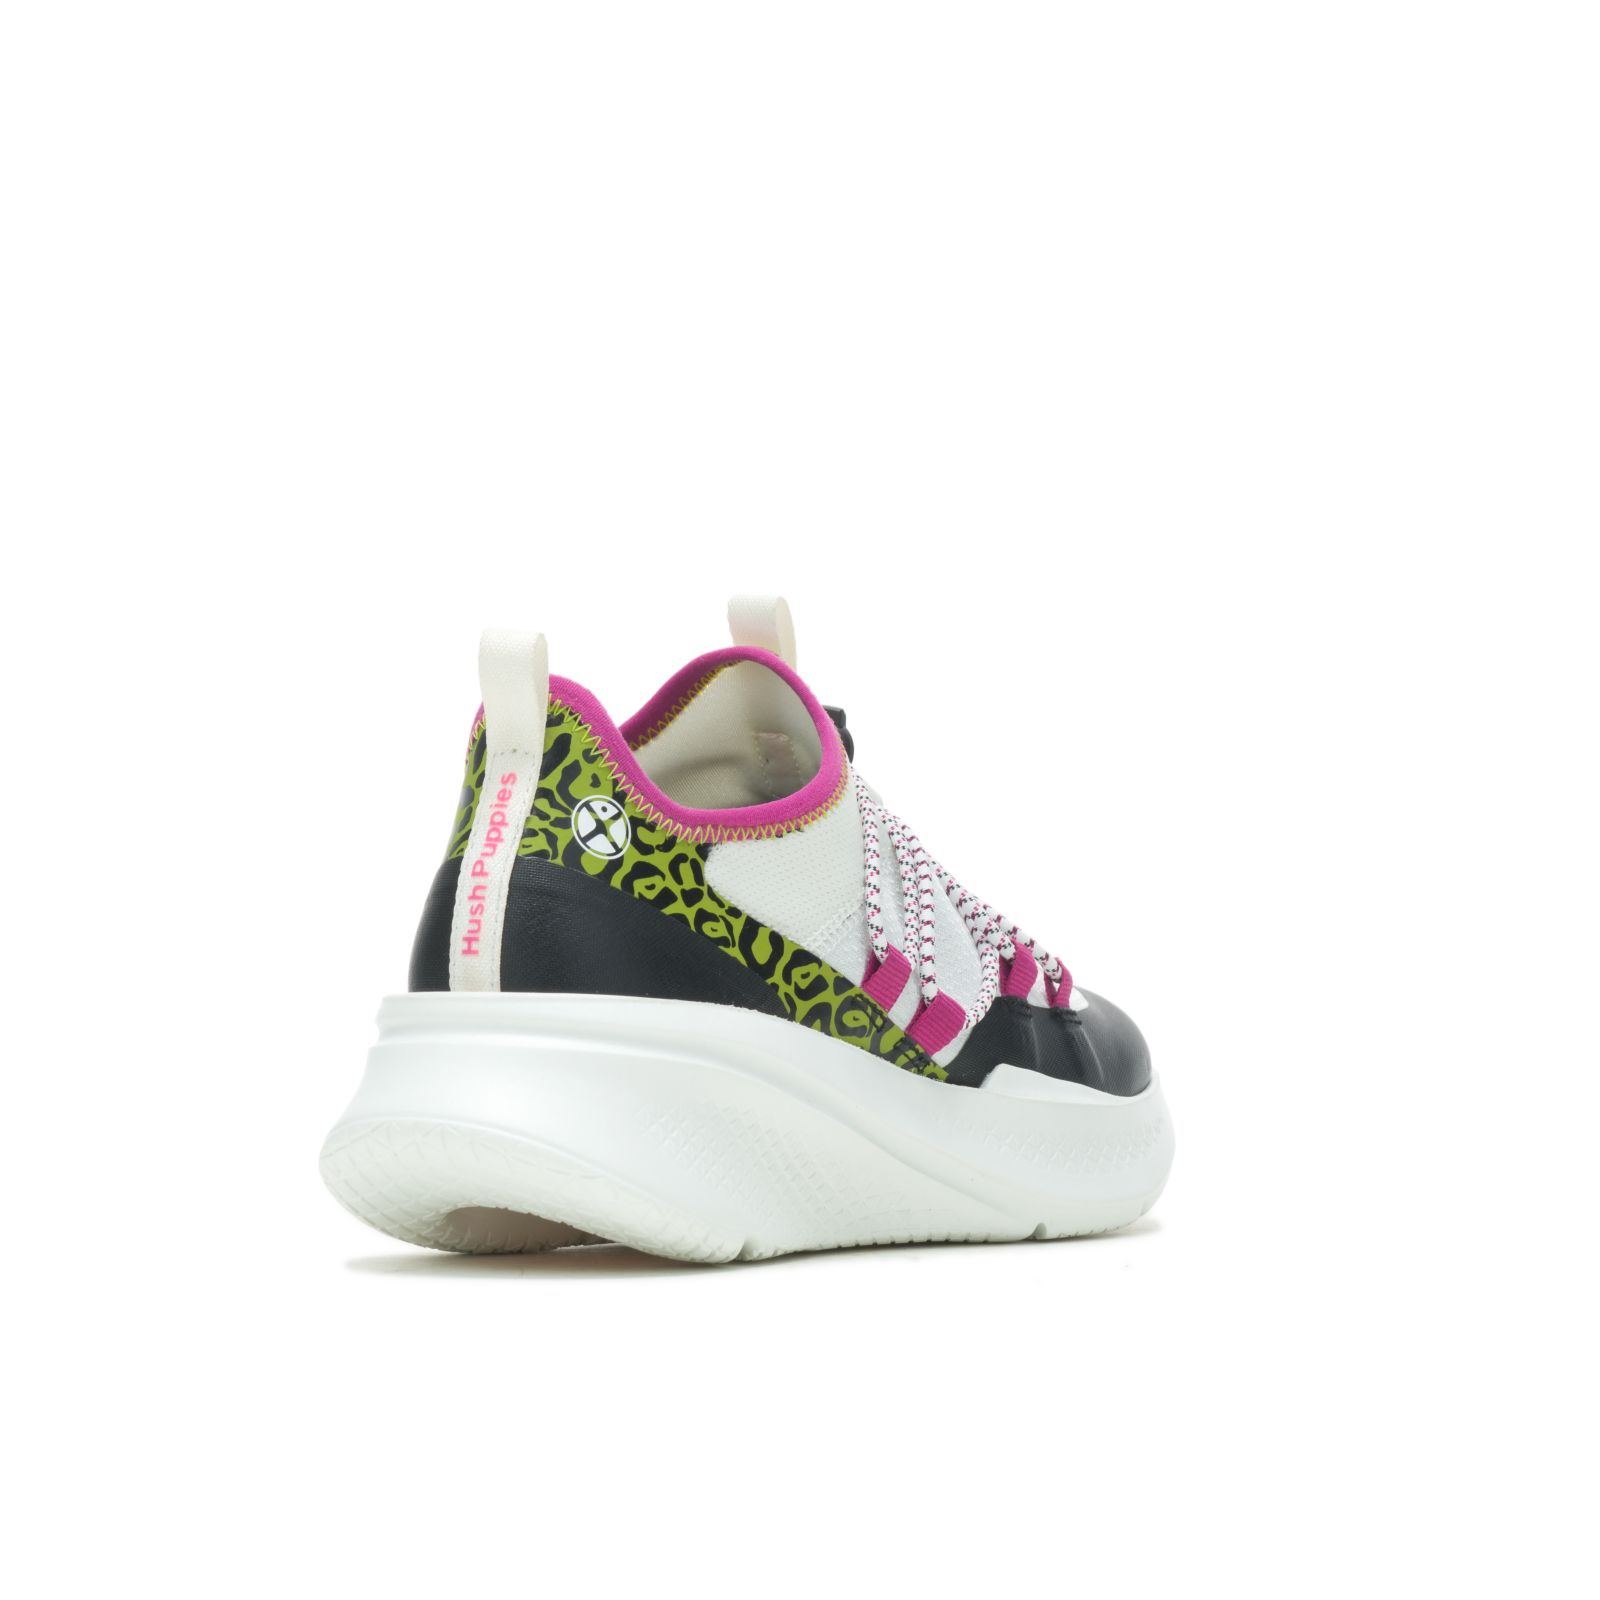 Tenis Hush Puppies Spark Bungee Mujer Blancos Multicolor | UAPSZMD-70